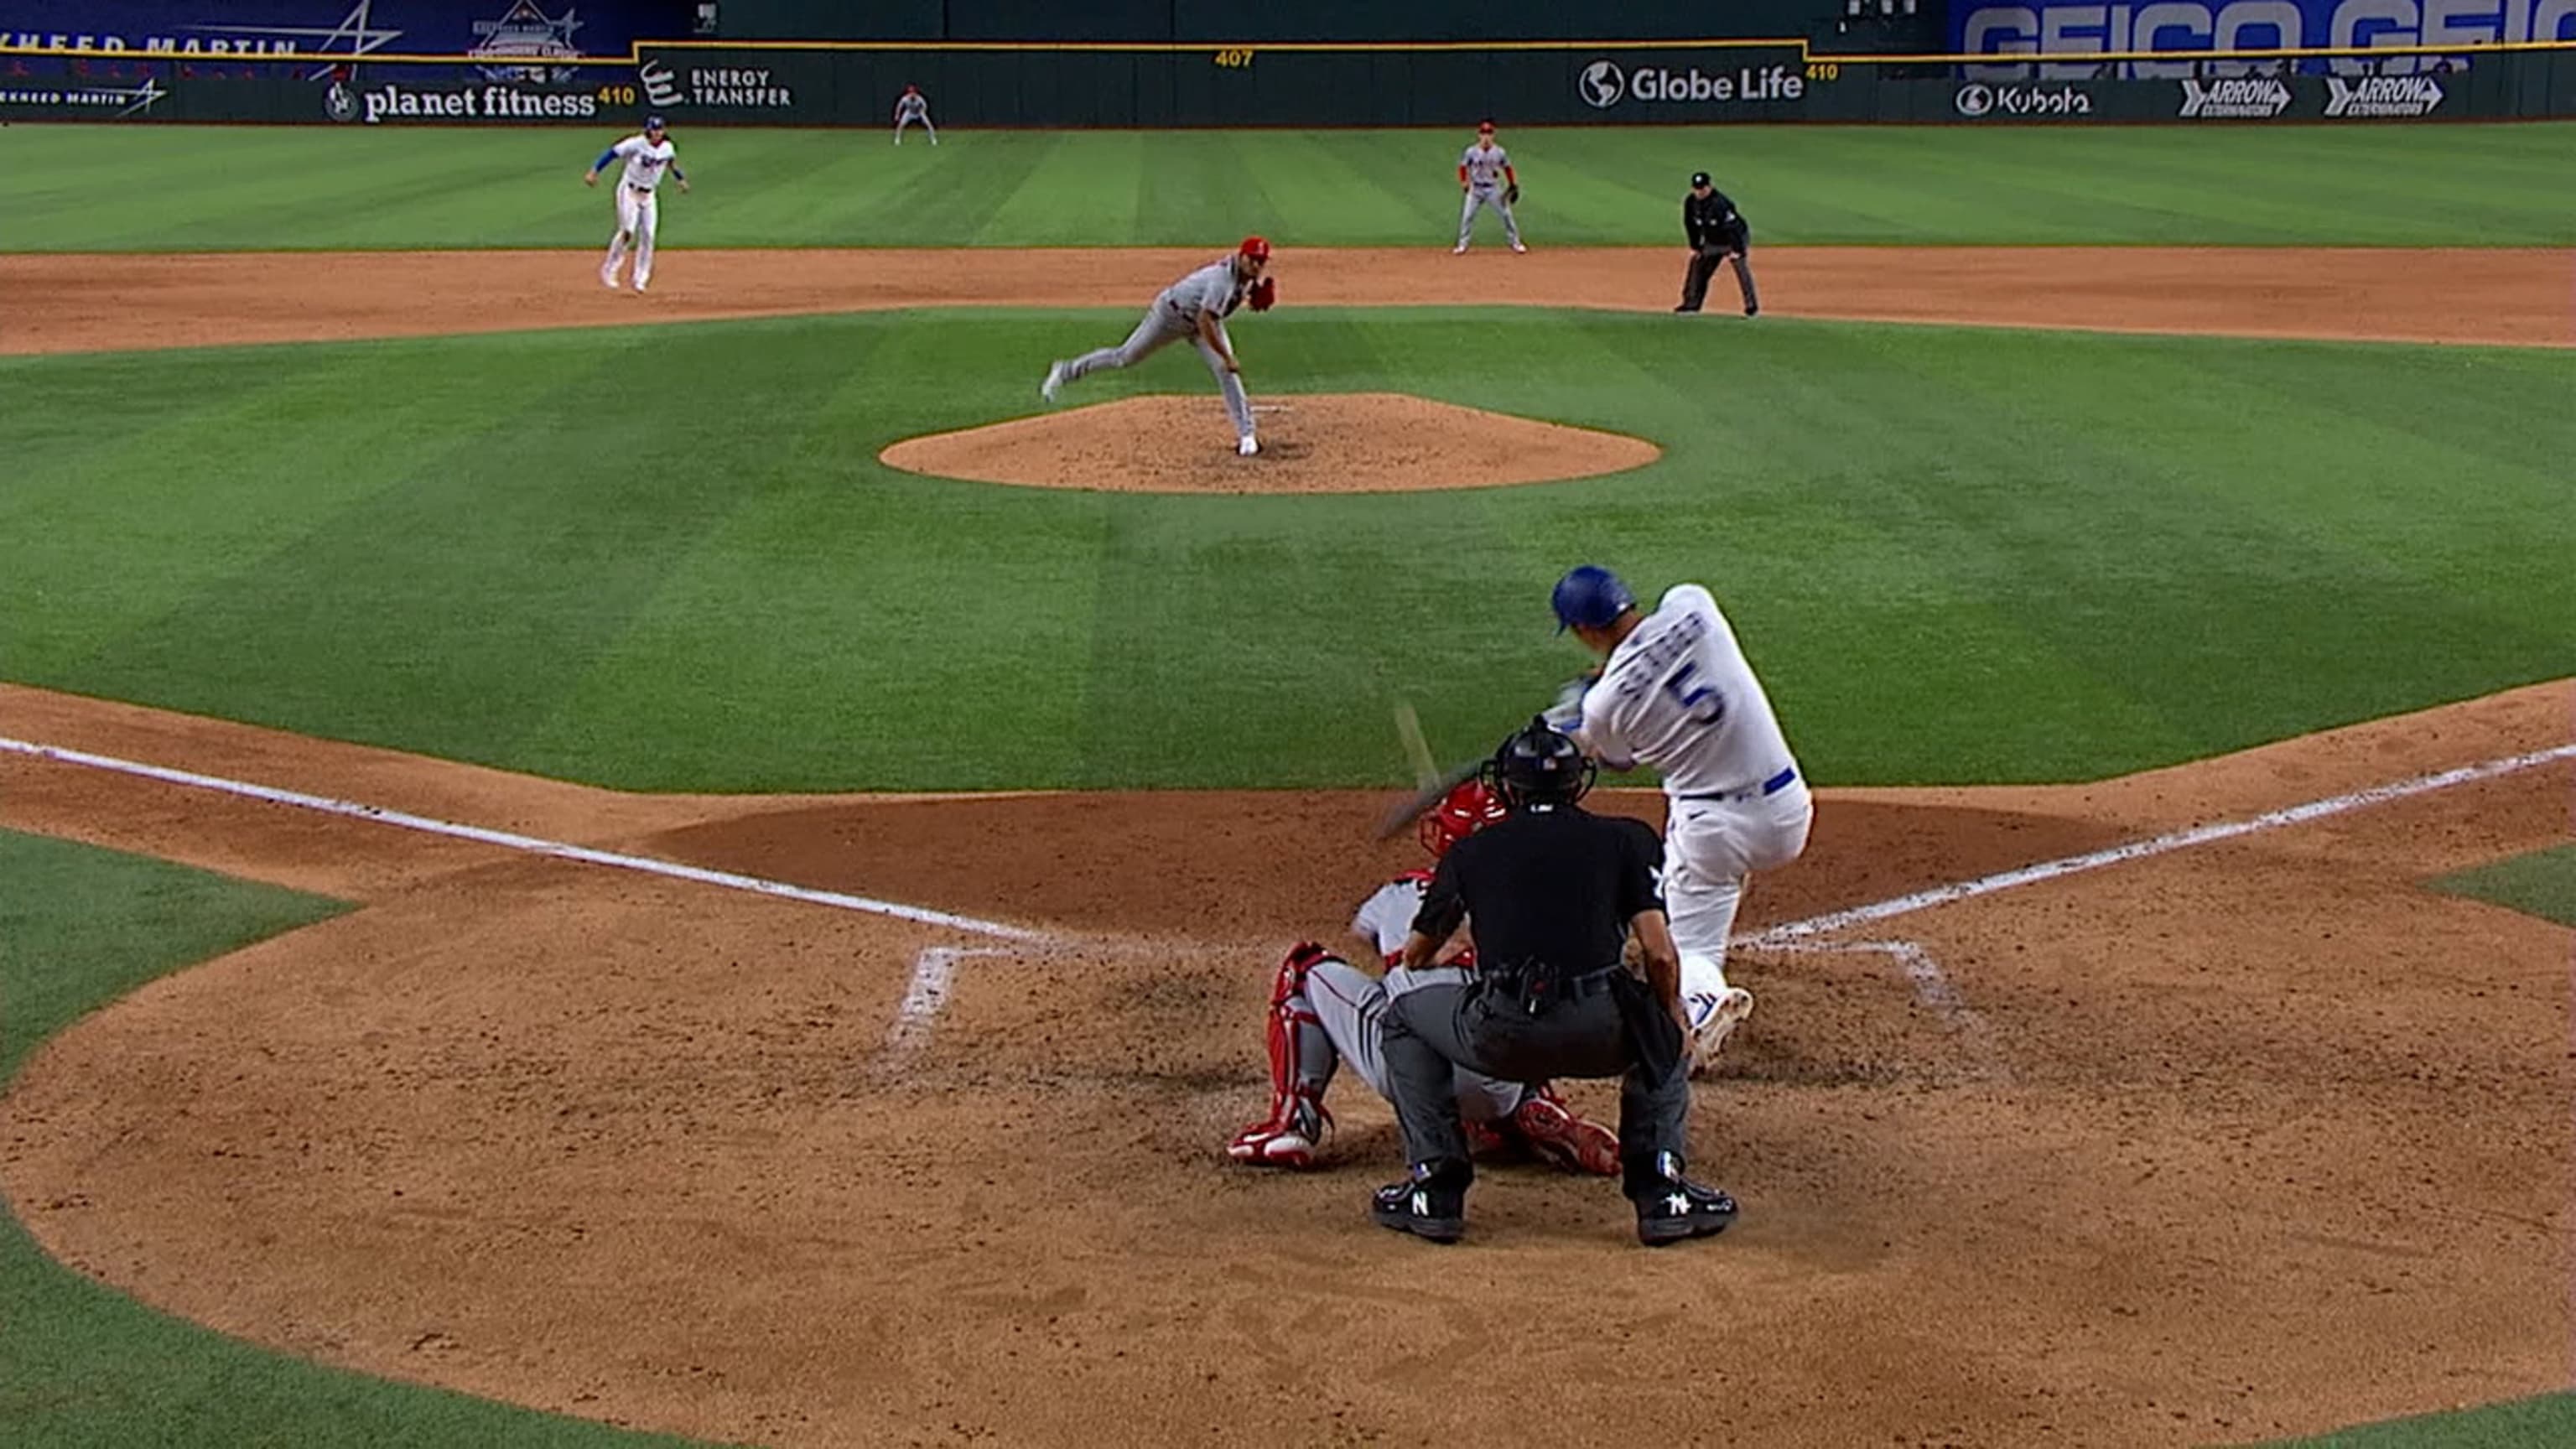 Randal Grichuk takes a homer away from Corey Seager 